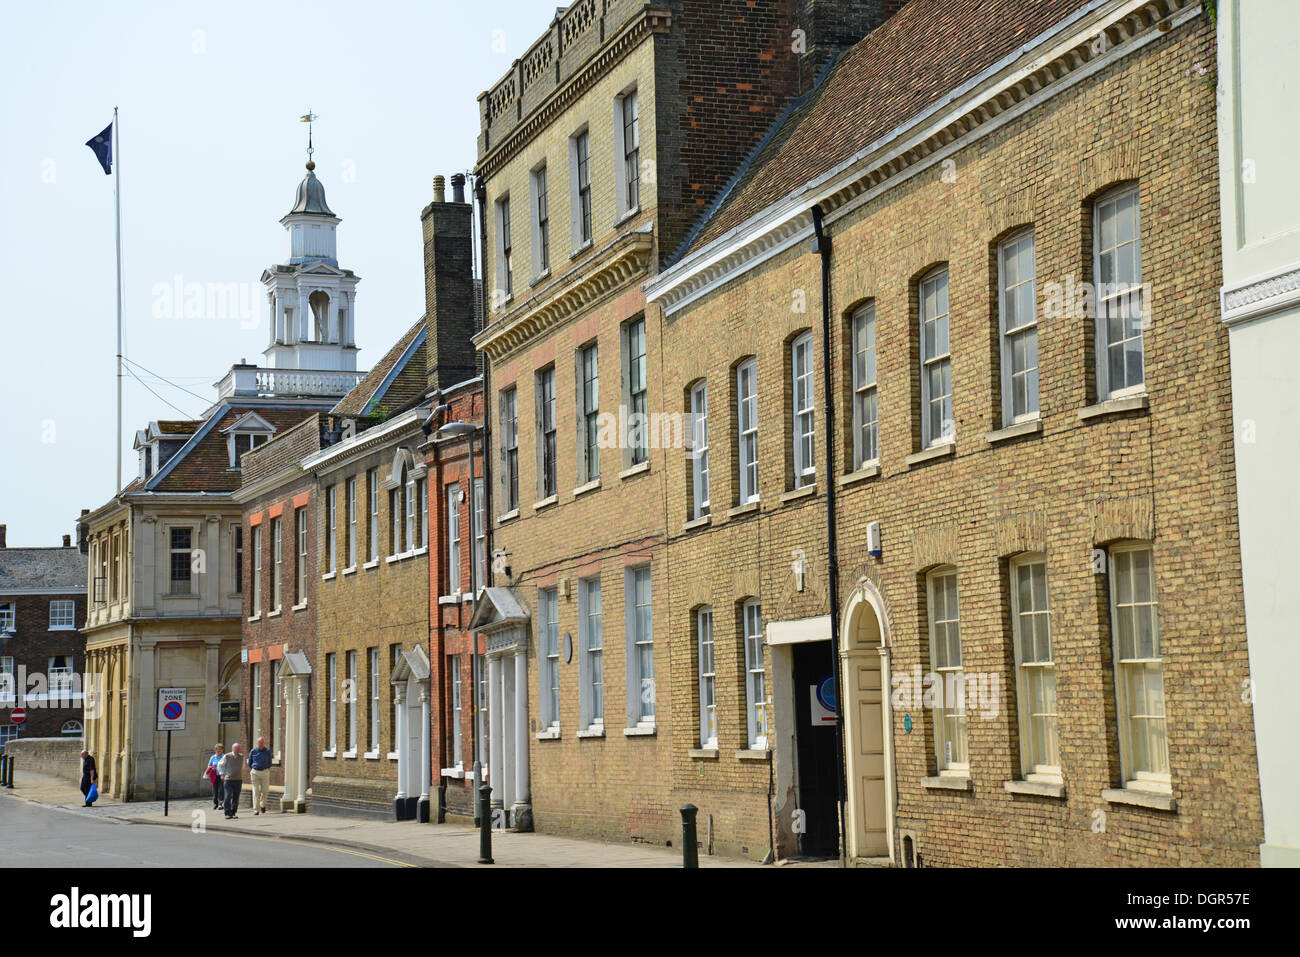 King Street, King's Lynn, Norfolk, Angleterre, Royaume-Uni Banque D'Images